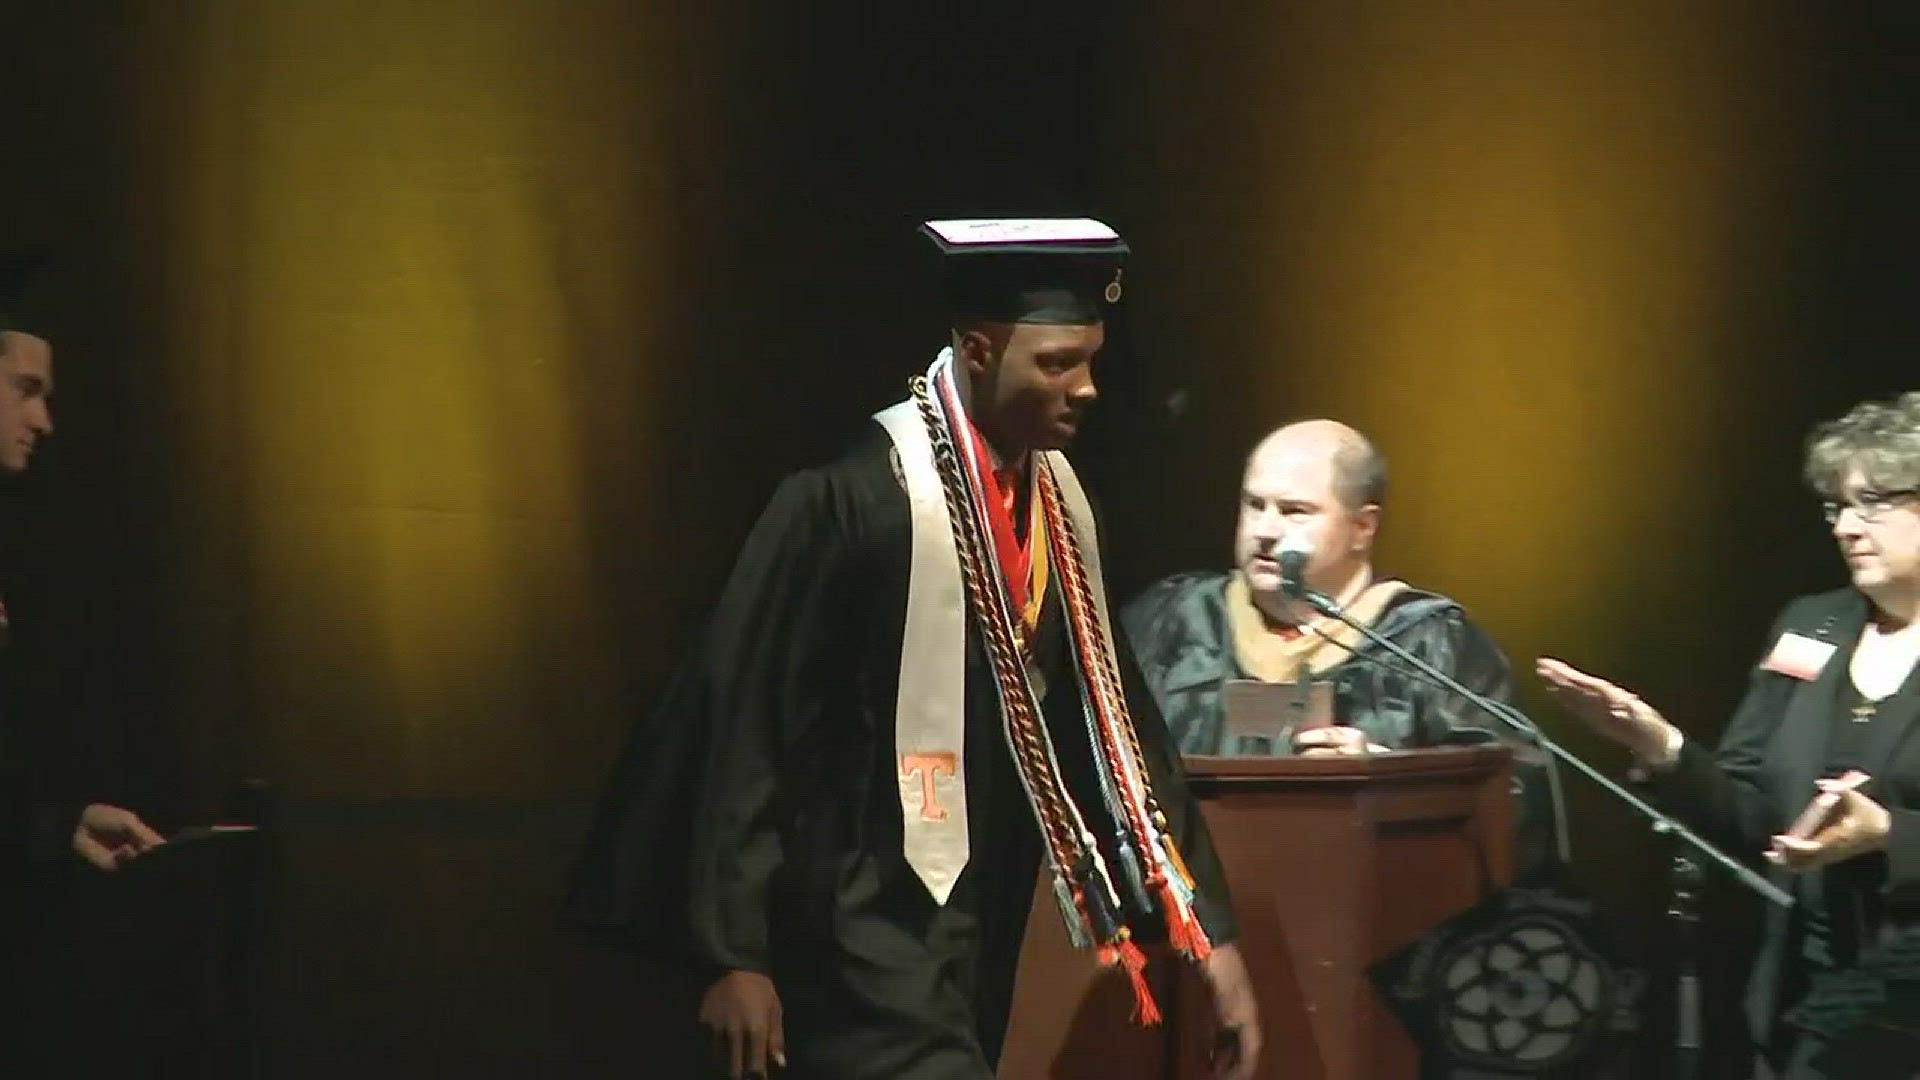 Former Vols QB Josh Dobbs walked across the stage on Thursday to receive his bachelor's degree from Tennessee. Friday morning he'll practice for the first time as a Pittsburgh Steeler.